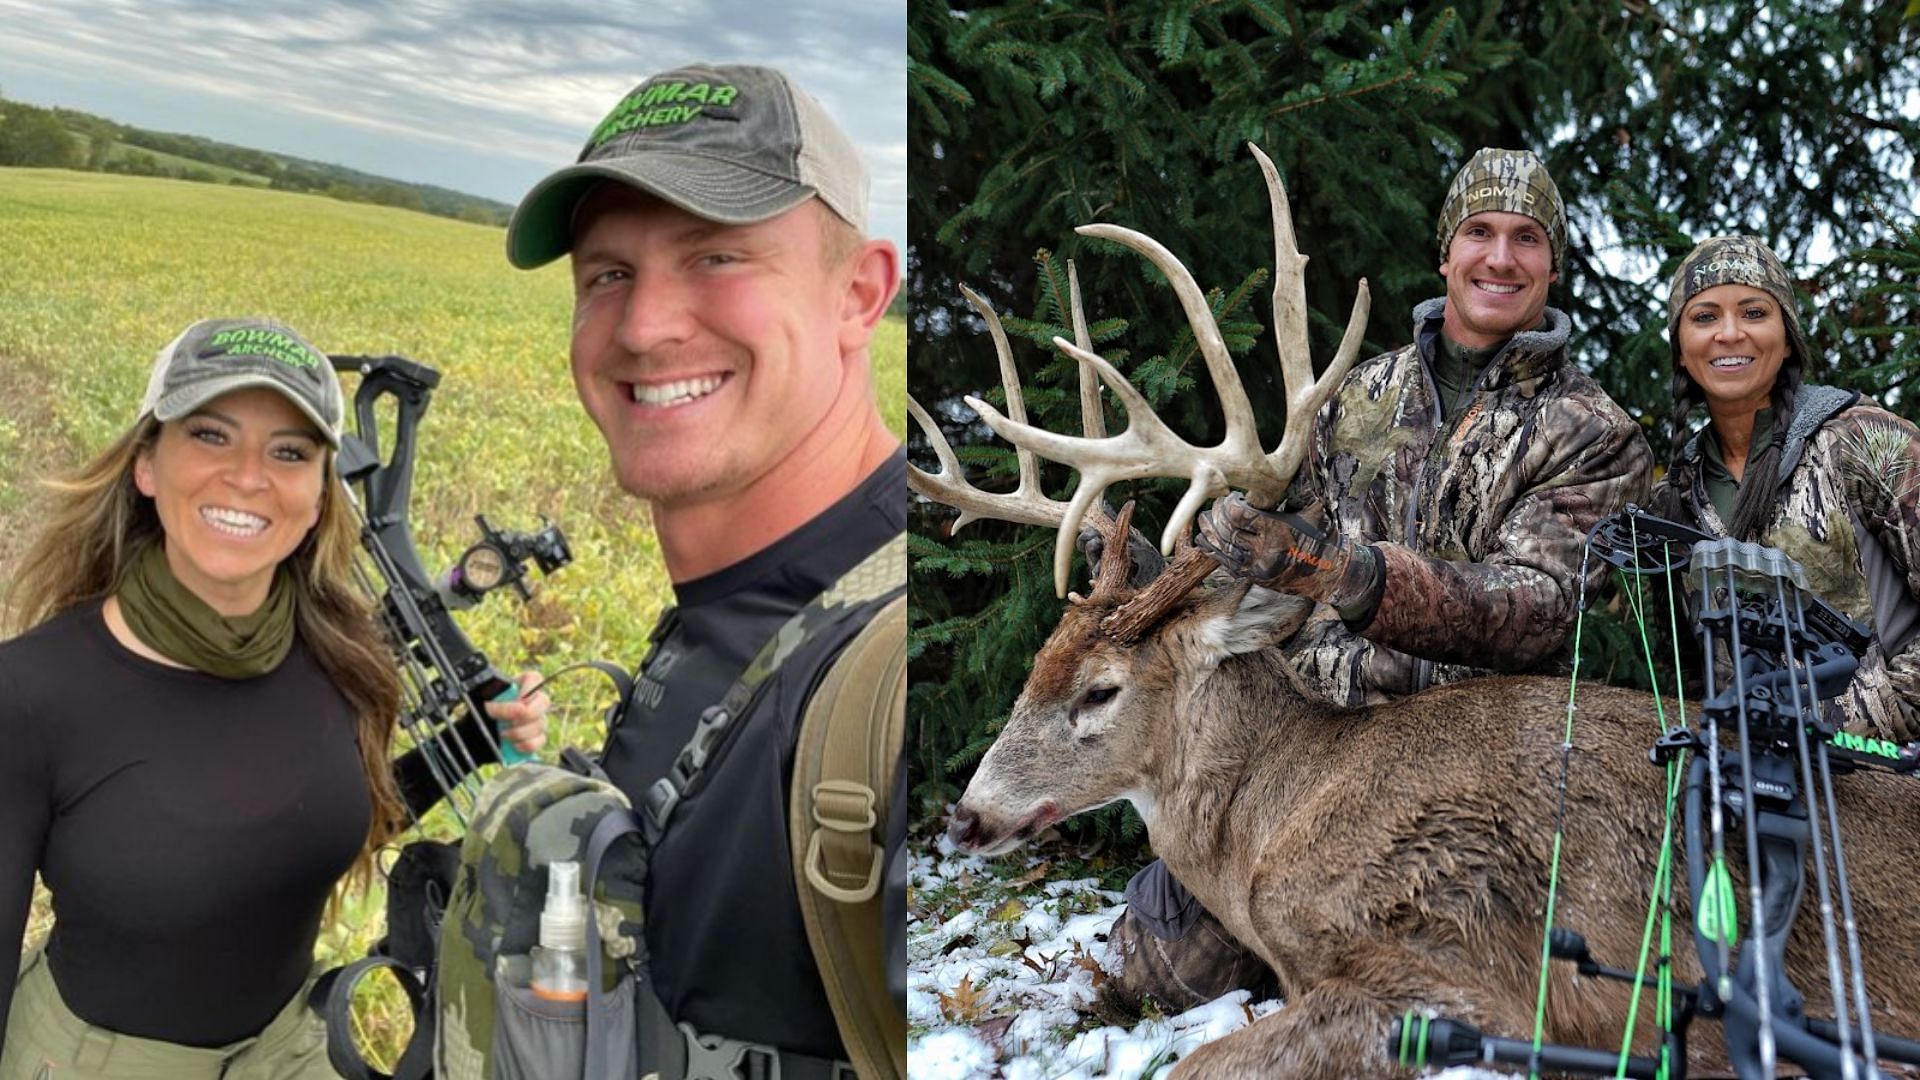 Josh and Sarah plead guilty to one count of poaching (image via Instagram/bowmarbowhunting)